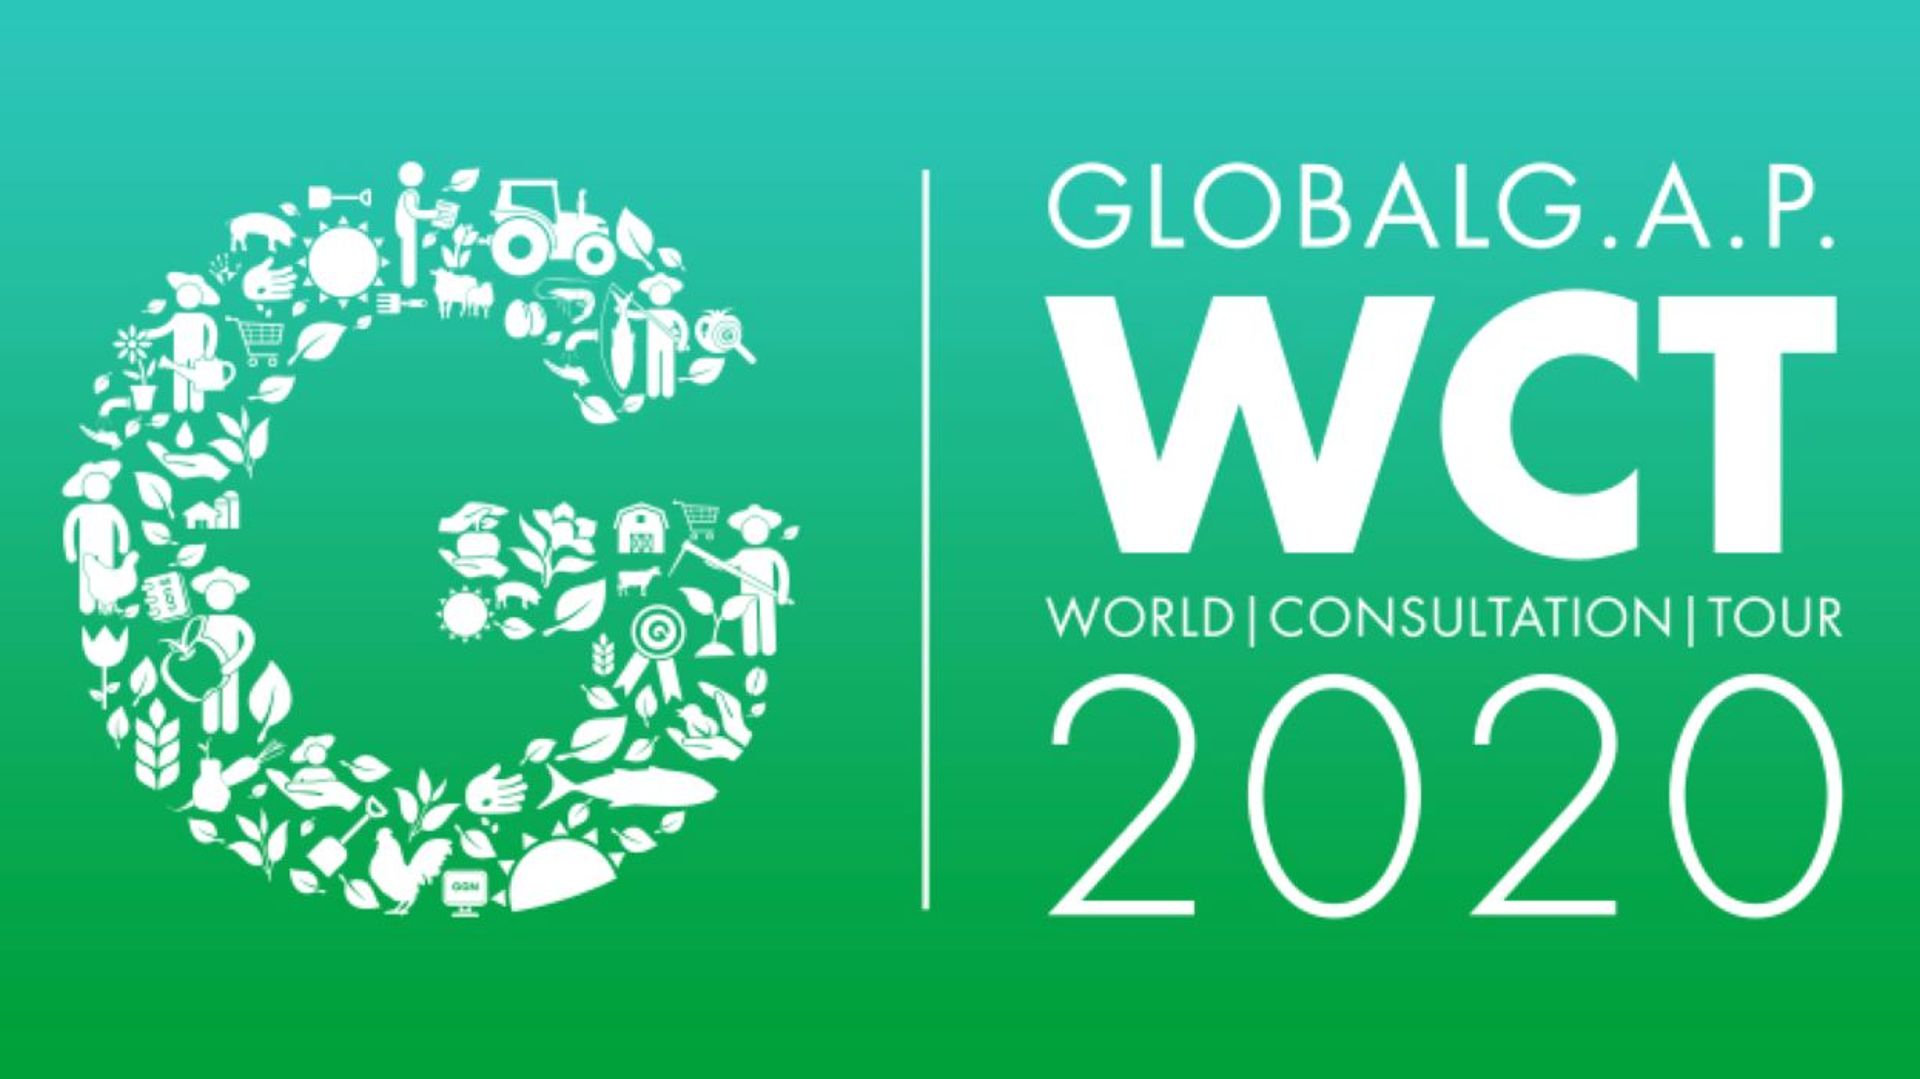 Banner from the GLOBALG.A.P. World Consultation Tour 2020